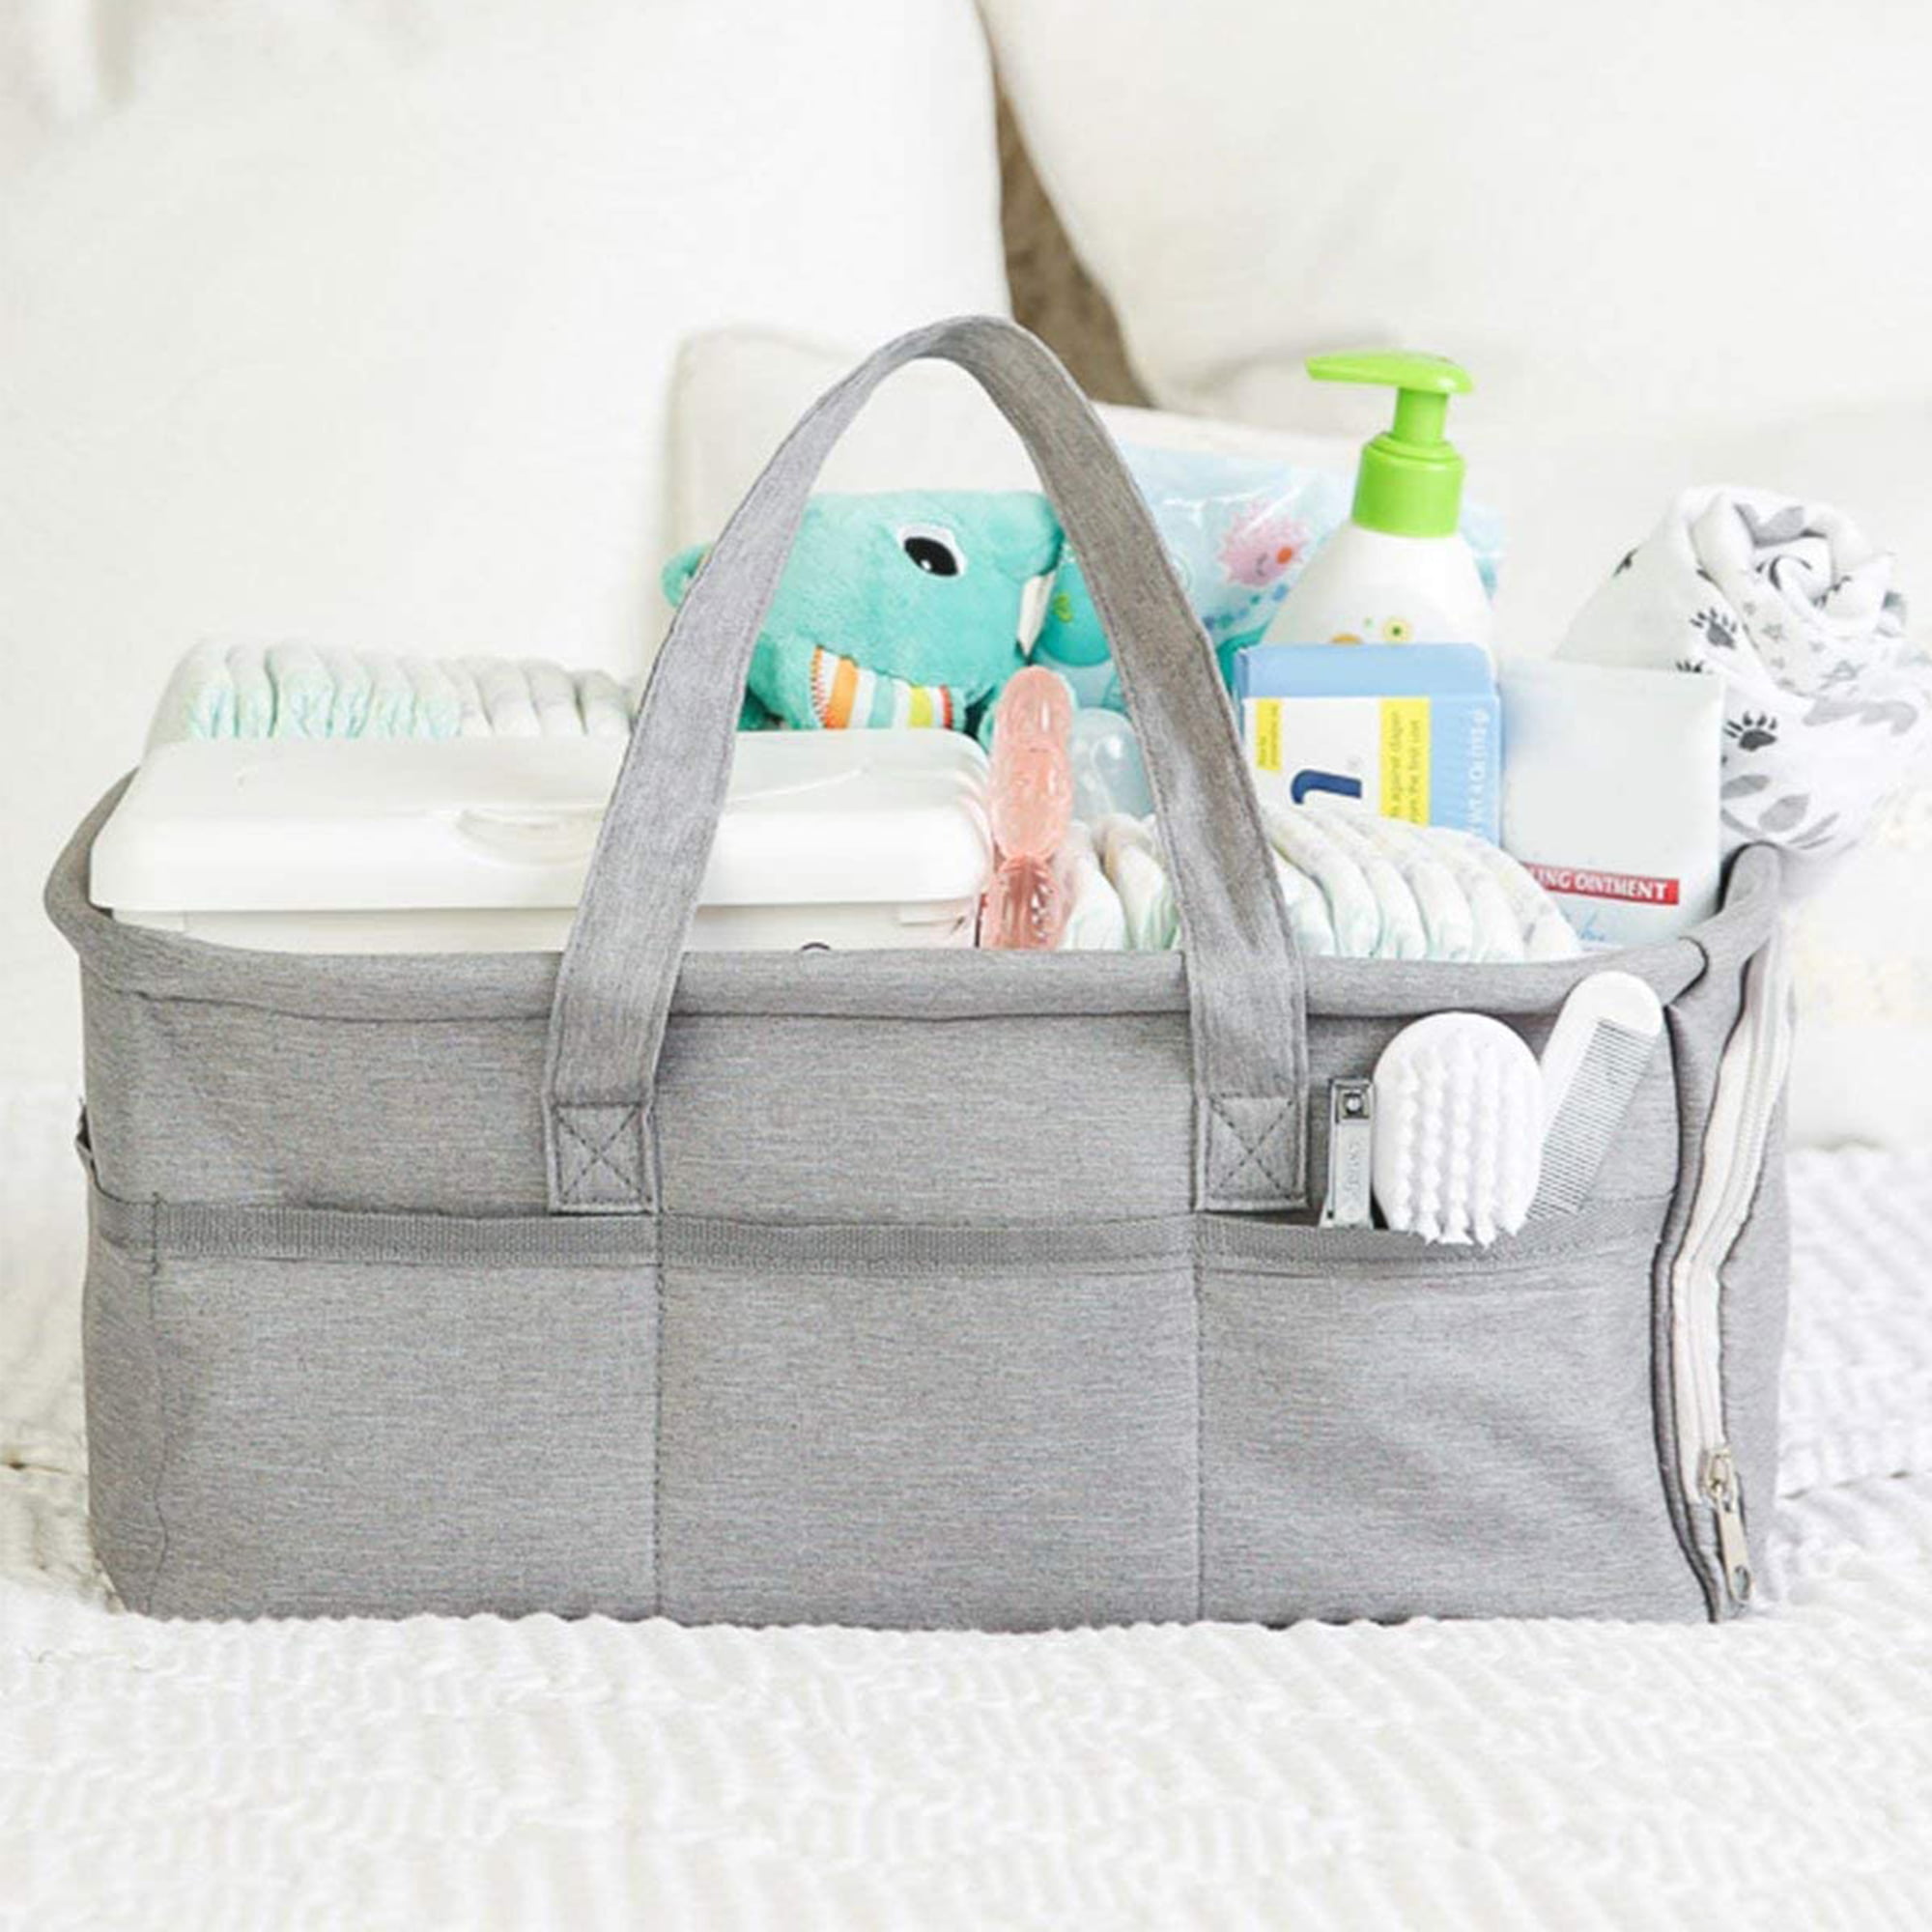 Camisin Diaper Caddy Organizer Baby Nursery Storage Basket with Zipper Lid and Leather Handle Baby Changing Bag